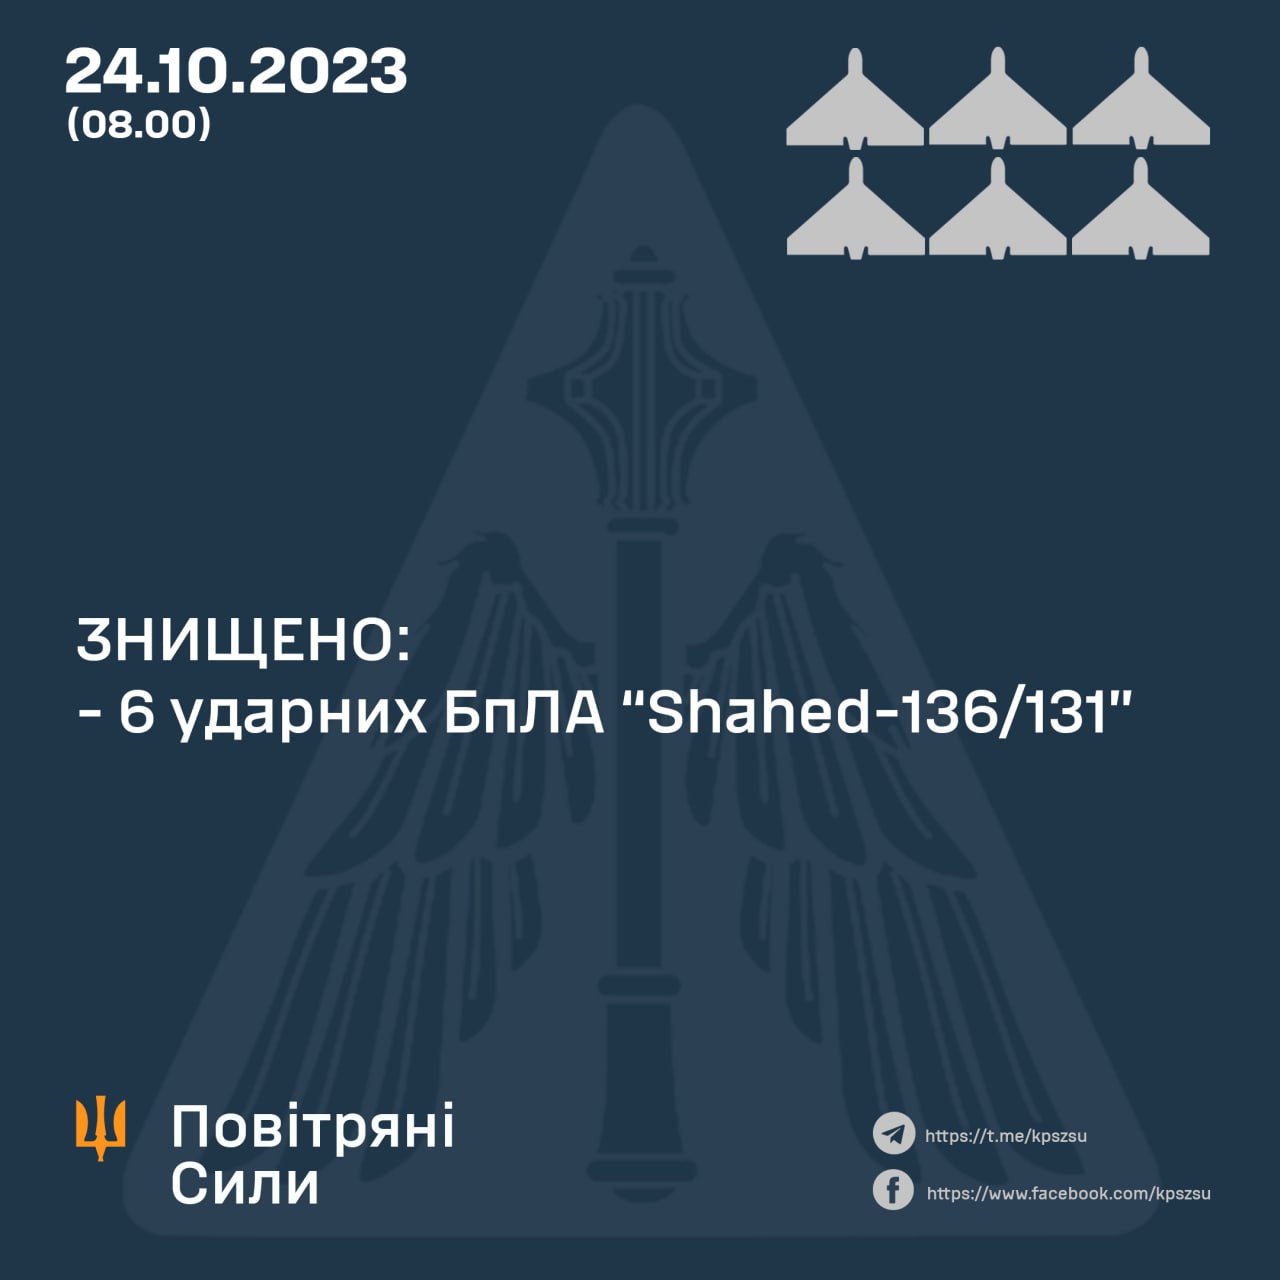 Infographics by the Air Force of the Armed Forces of Ukraine: 6 Shahed 131/136 attack UAVs were destroyed, Defense Express